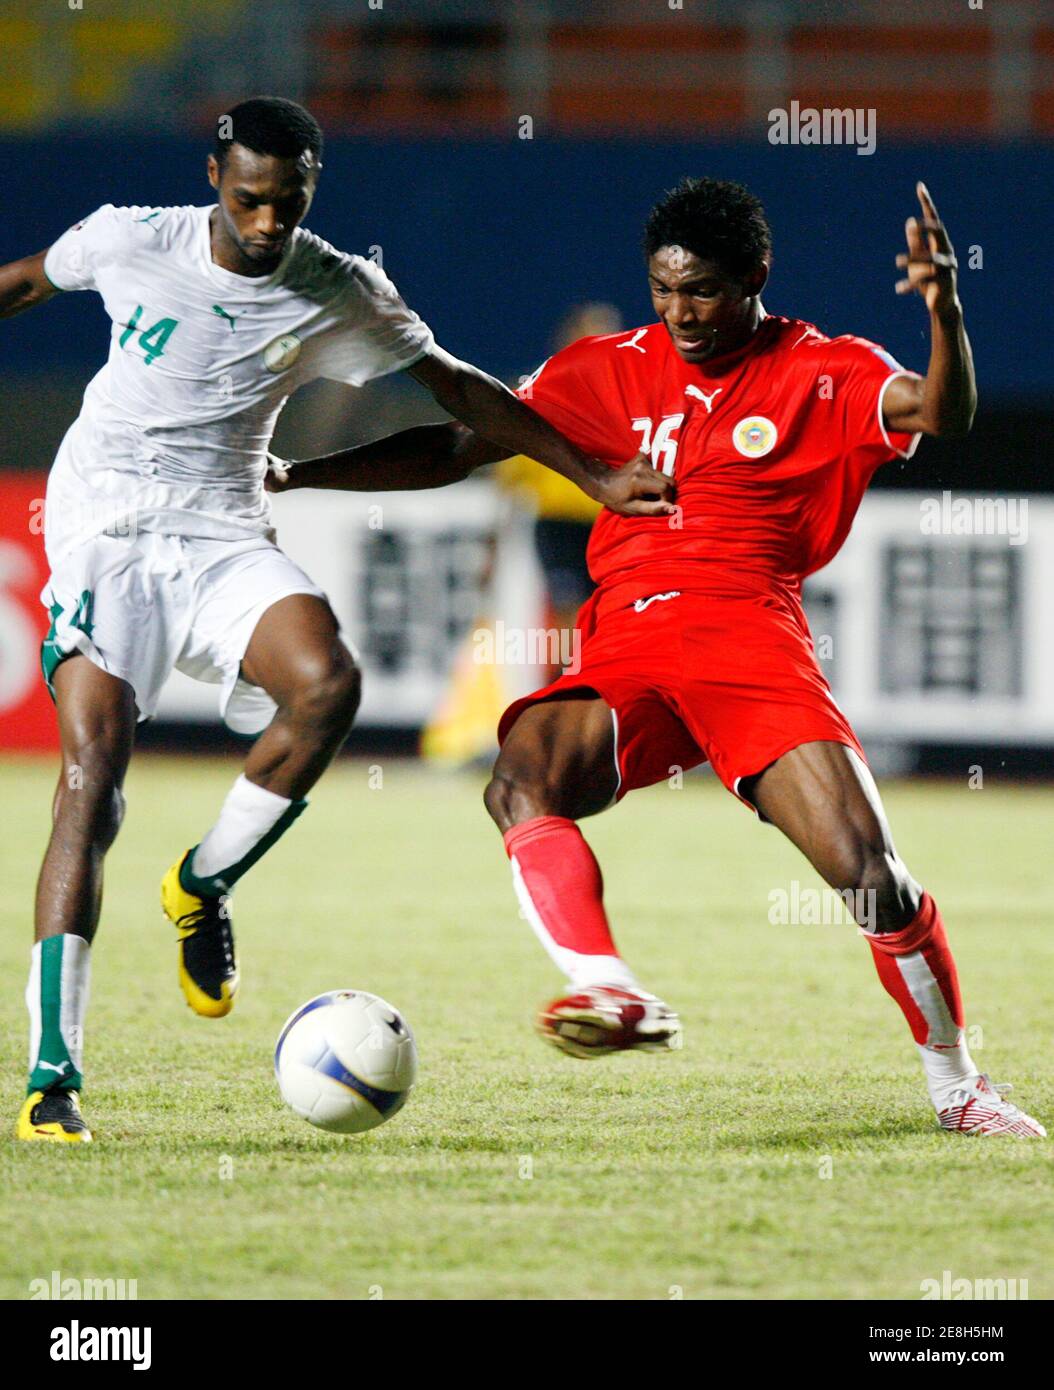 Saudi Arabia's Saud Khariri (L) fights for the ball with Bahrain's Jaycee John Akwani during their 2007 AFC Asian Cup soccer tournament Group D match in the Indonesian city of Palembang July 18, 2007. REUTERS/Beawiharta (INDONESIA) Stock Photo